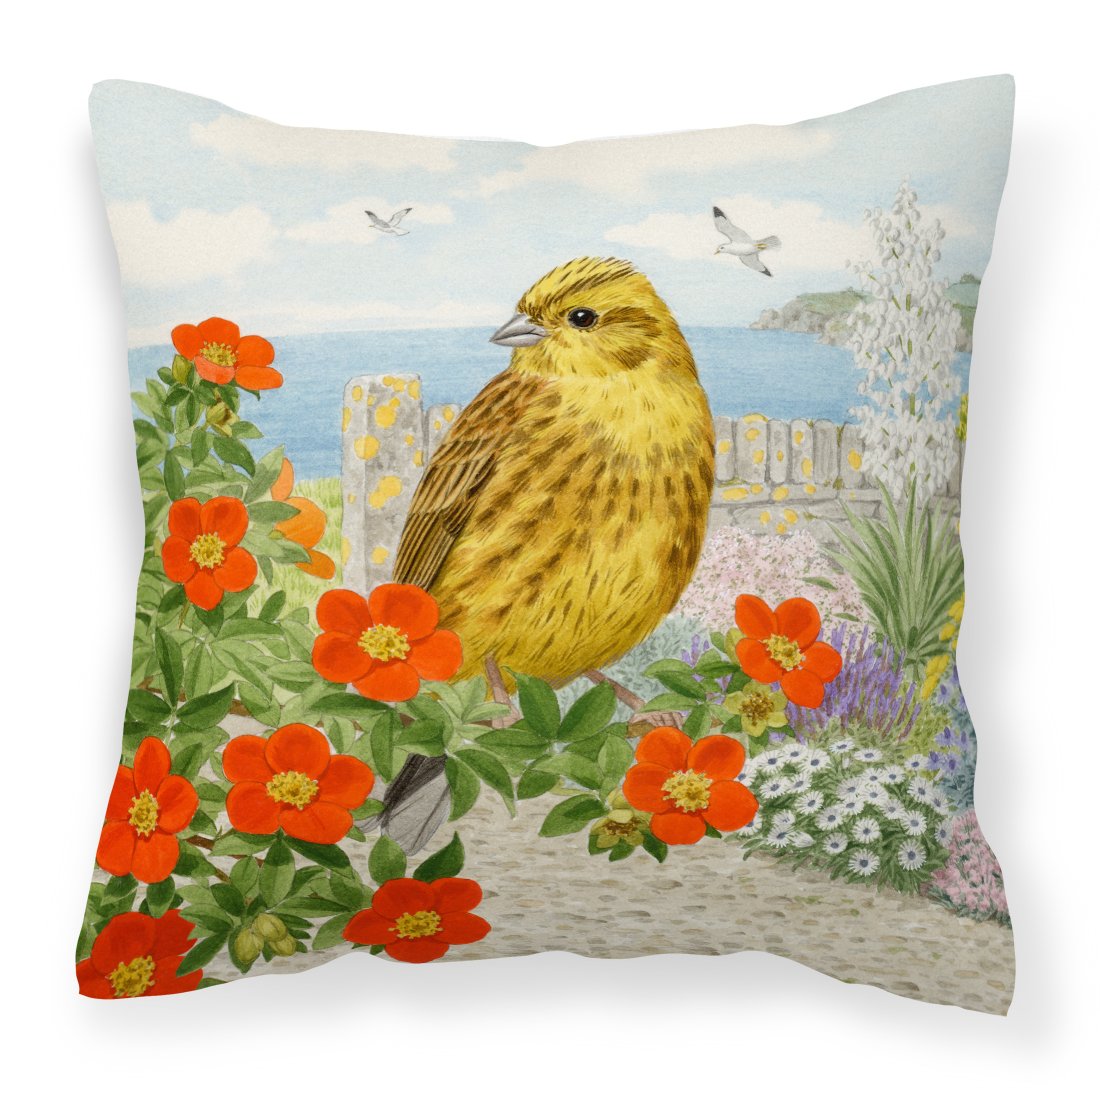 Yellowhammer by Sarah Adams Canvas Decorative Pillow by Caroline's Treasures